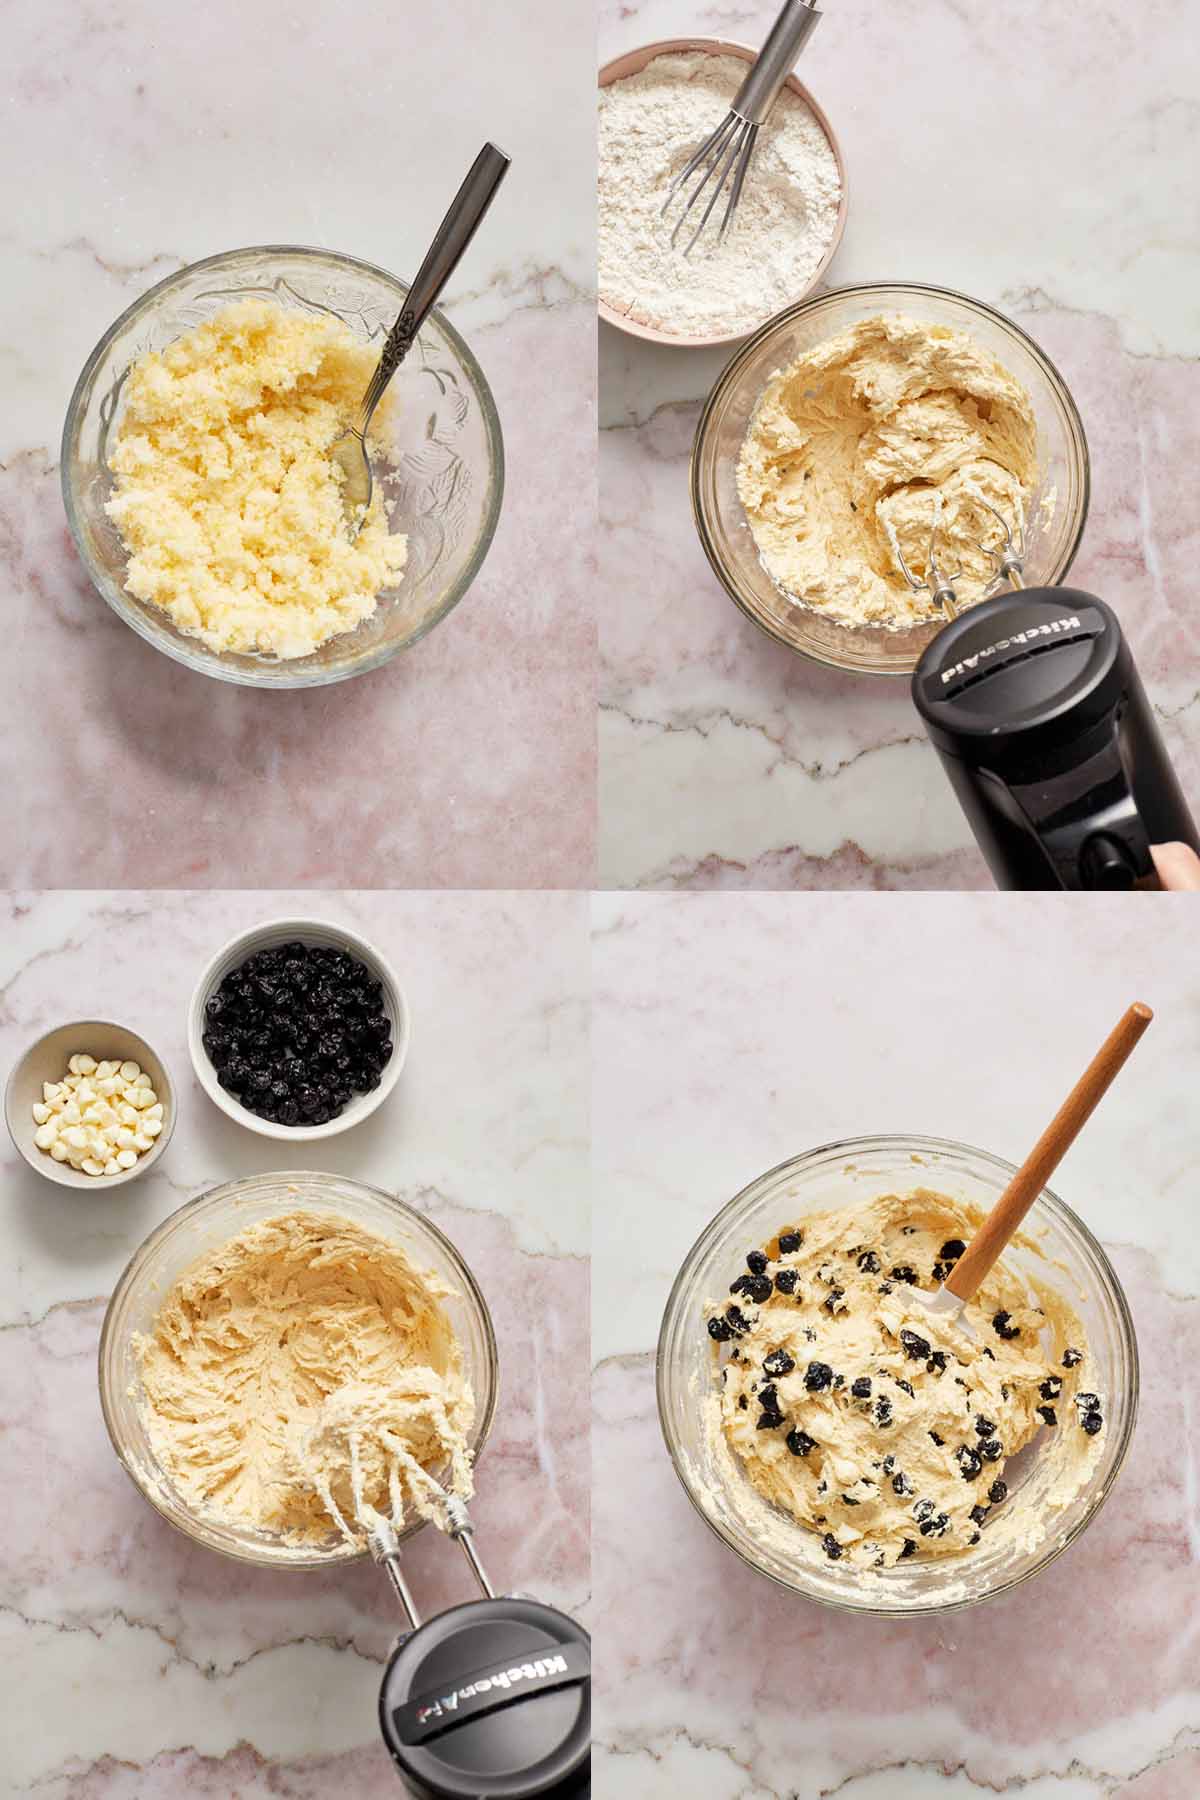 Collage of 4 images showing how the cookie dough is made.